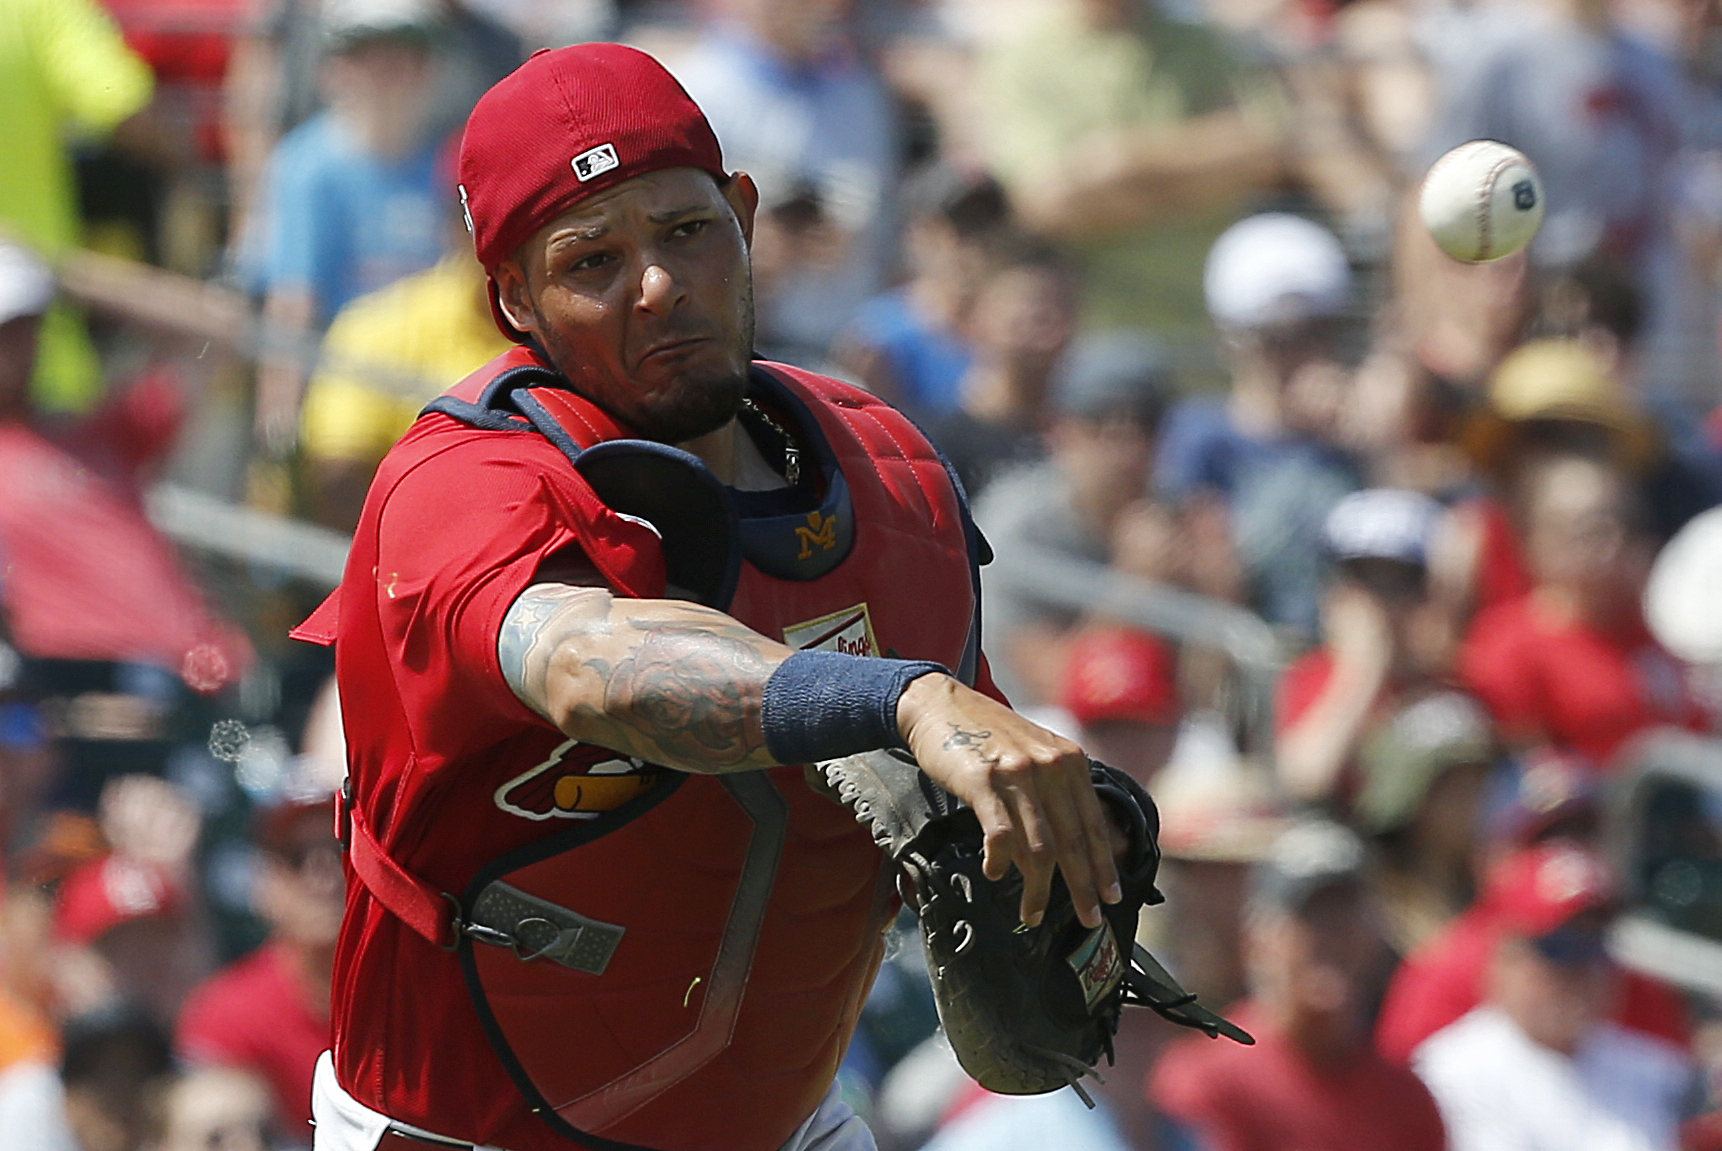 Yadier Molina: Cards catcher out after surgery - Sports Illustrated